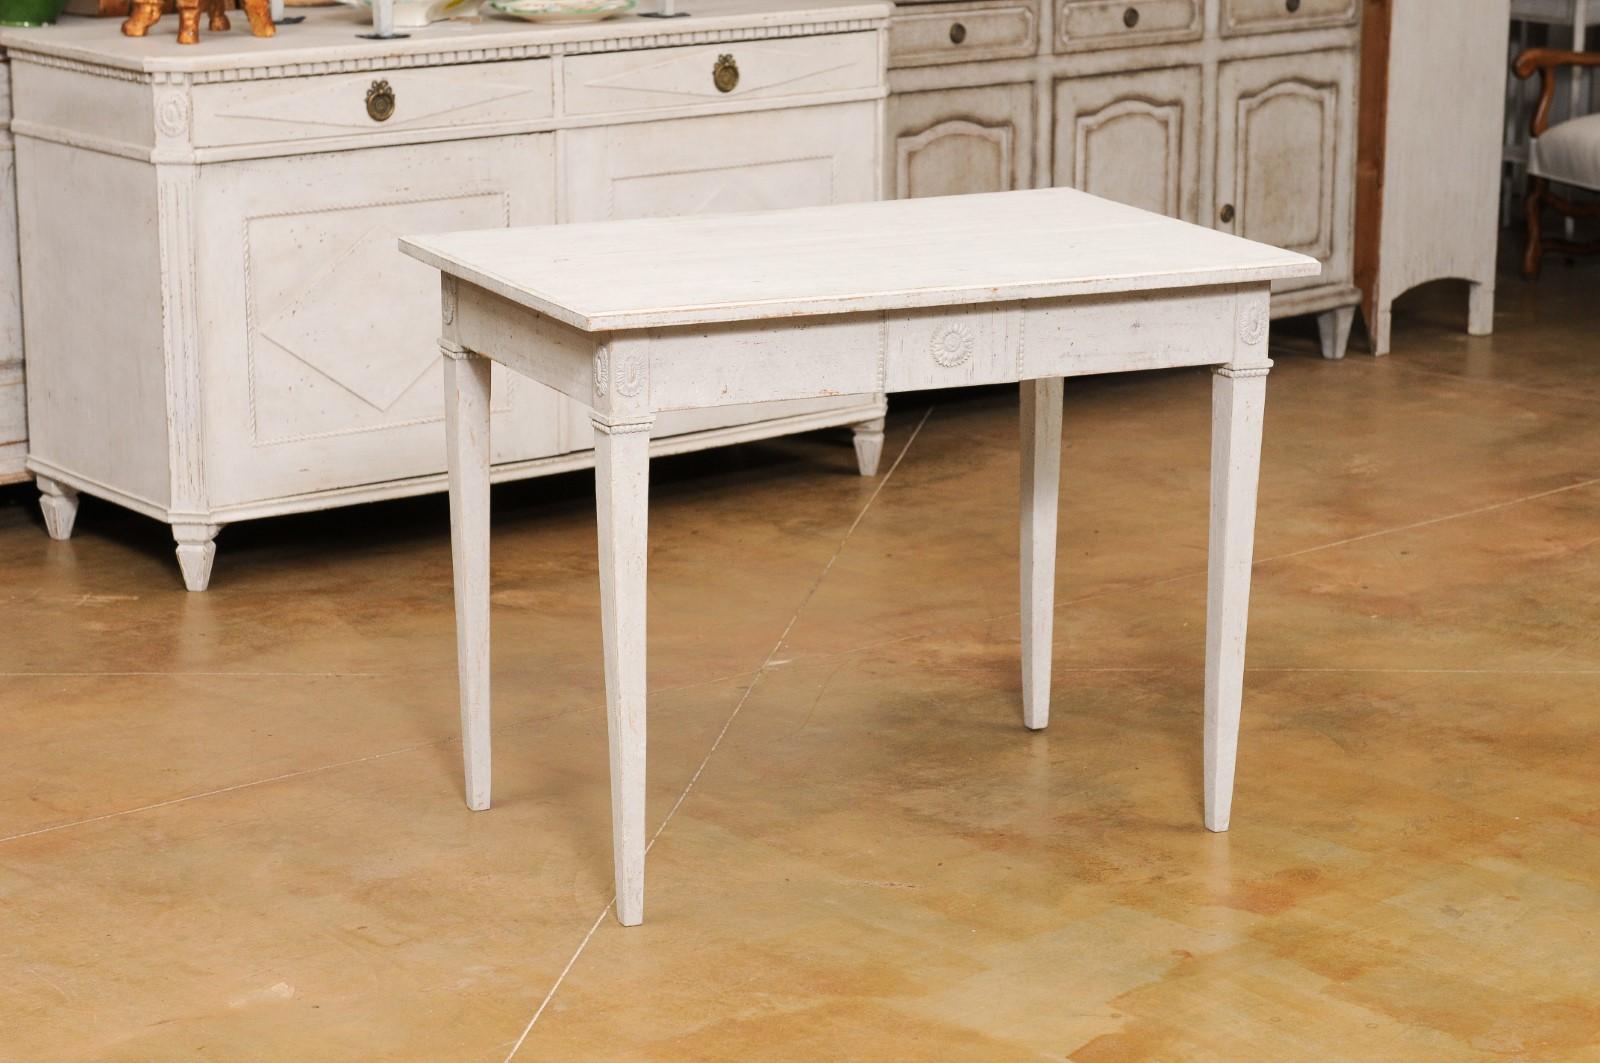 A Swedish Gustavian style painted wood table from the late 19th century, with carved rosettes and tapered legs. Created in Sweden during the last quarter of the 19th century, this painted table features a rectangular top sitting above an apron